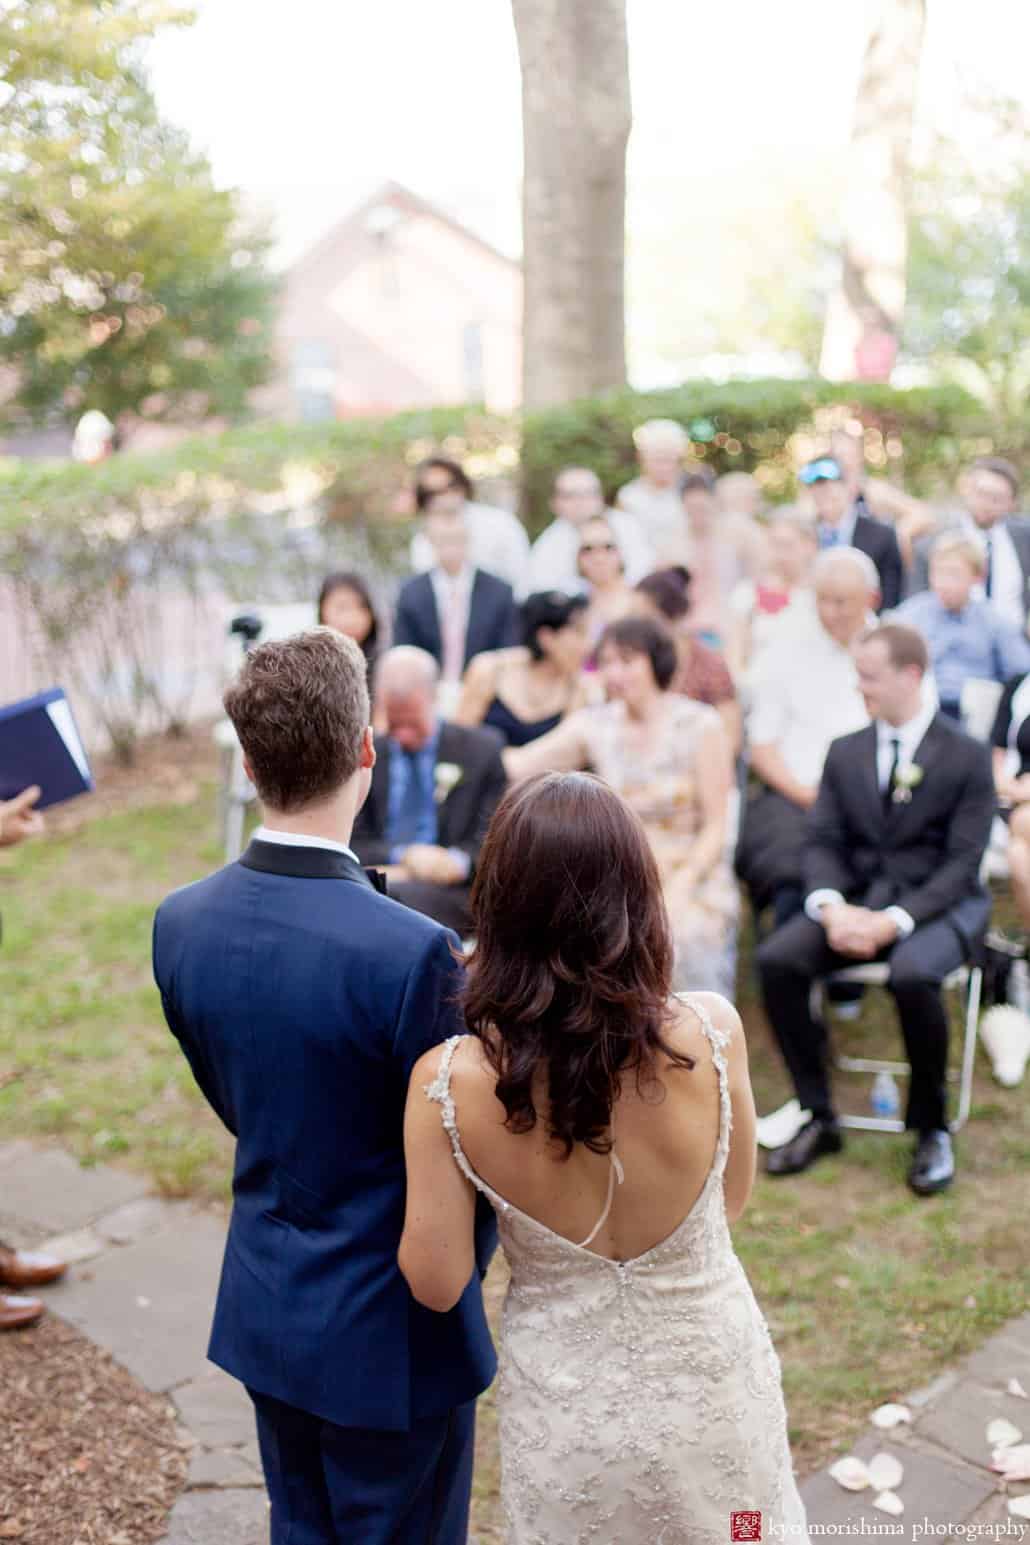 Bride and groom look out at guests as Governors Island wedding ceremony comes to an end, photographed by Kyo Morishima